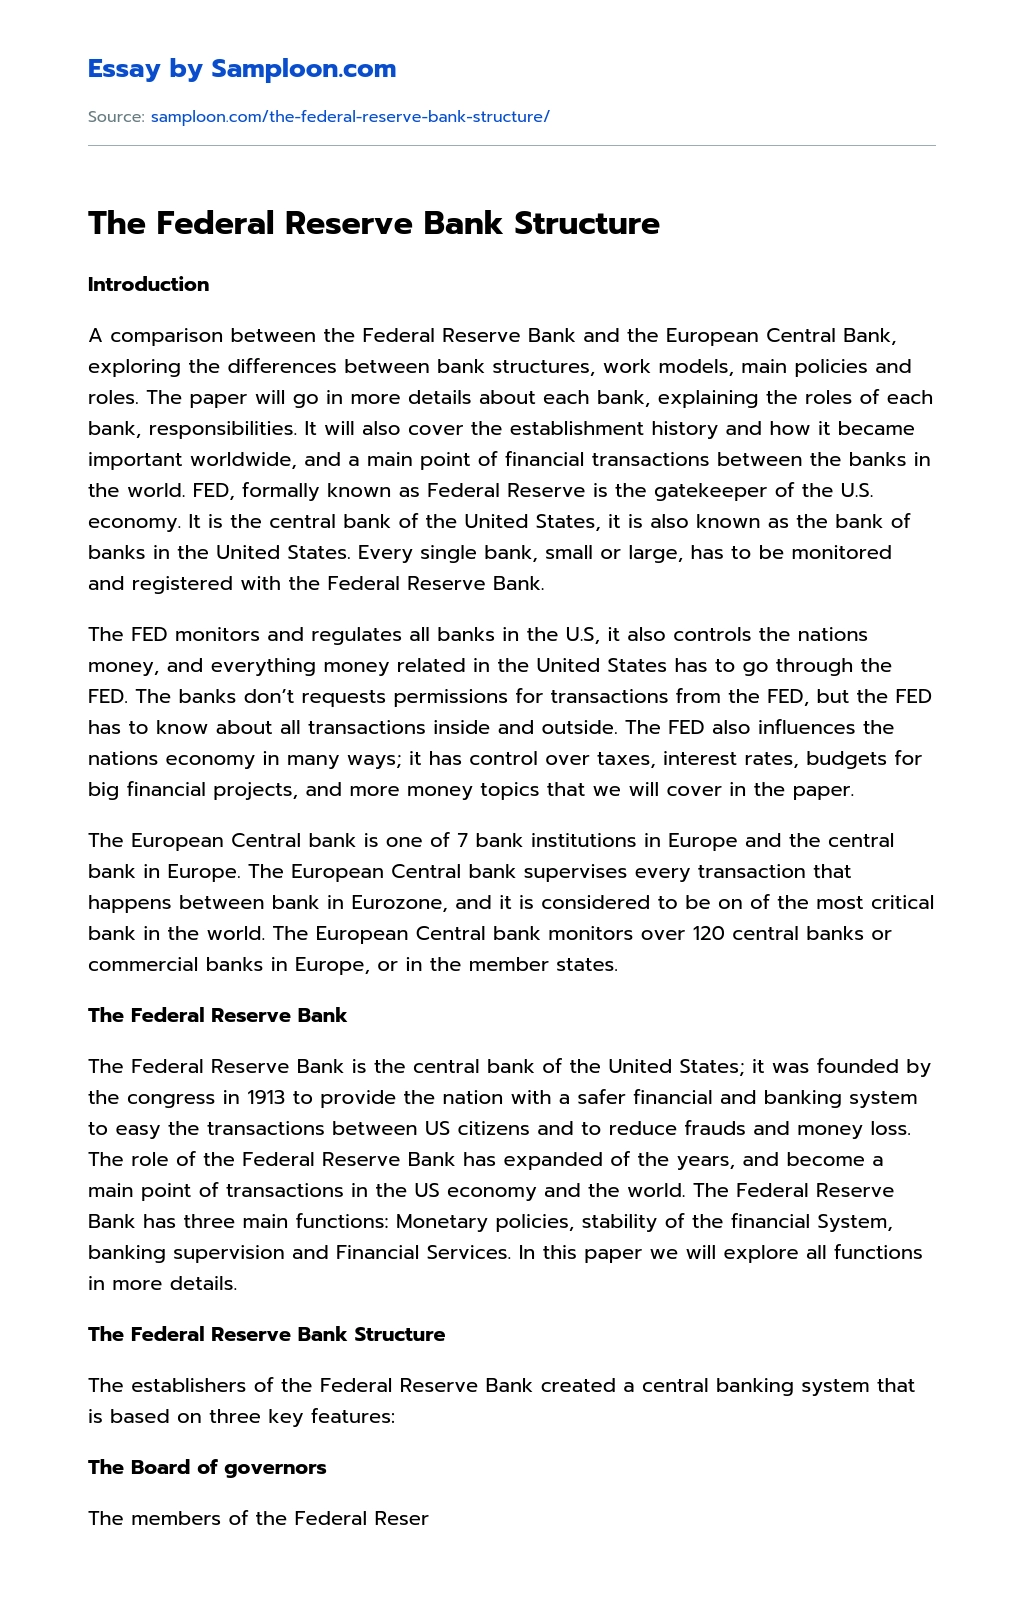 The Federal Reserve Bank Structure essay